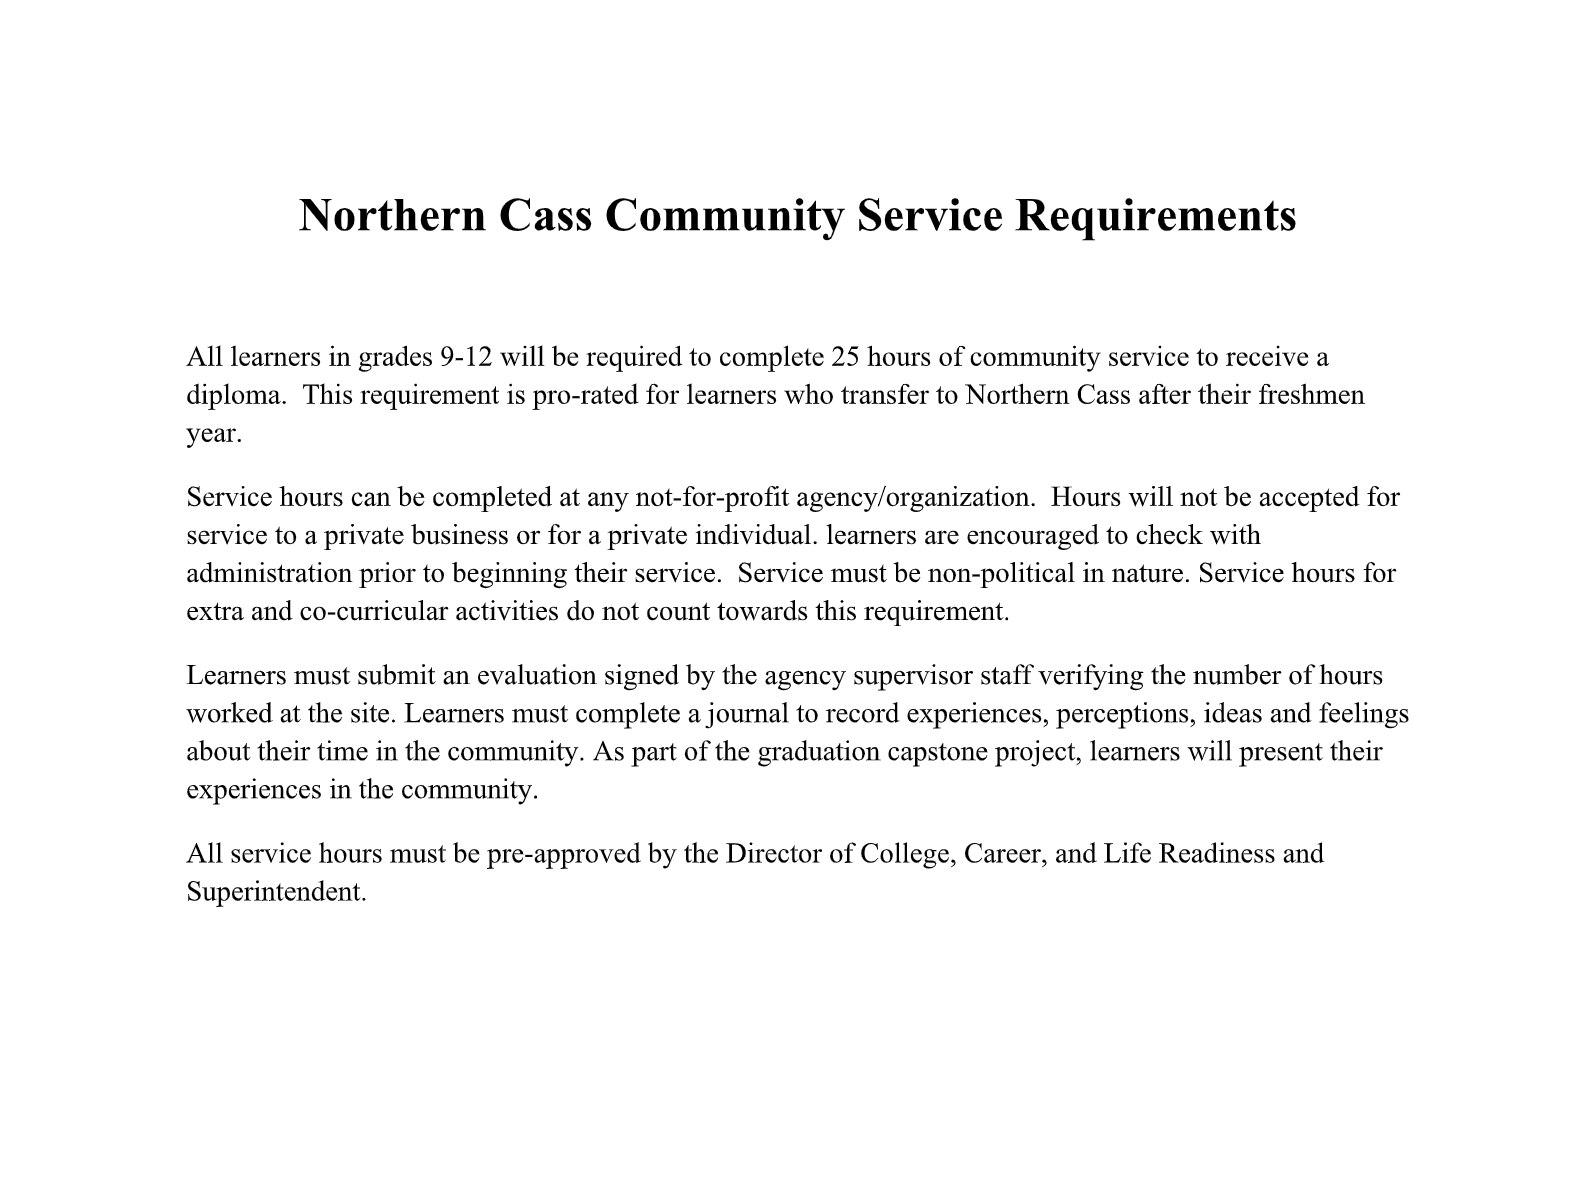 Community service requirements